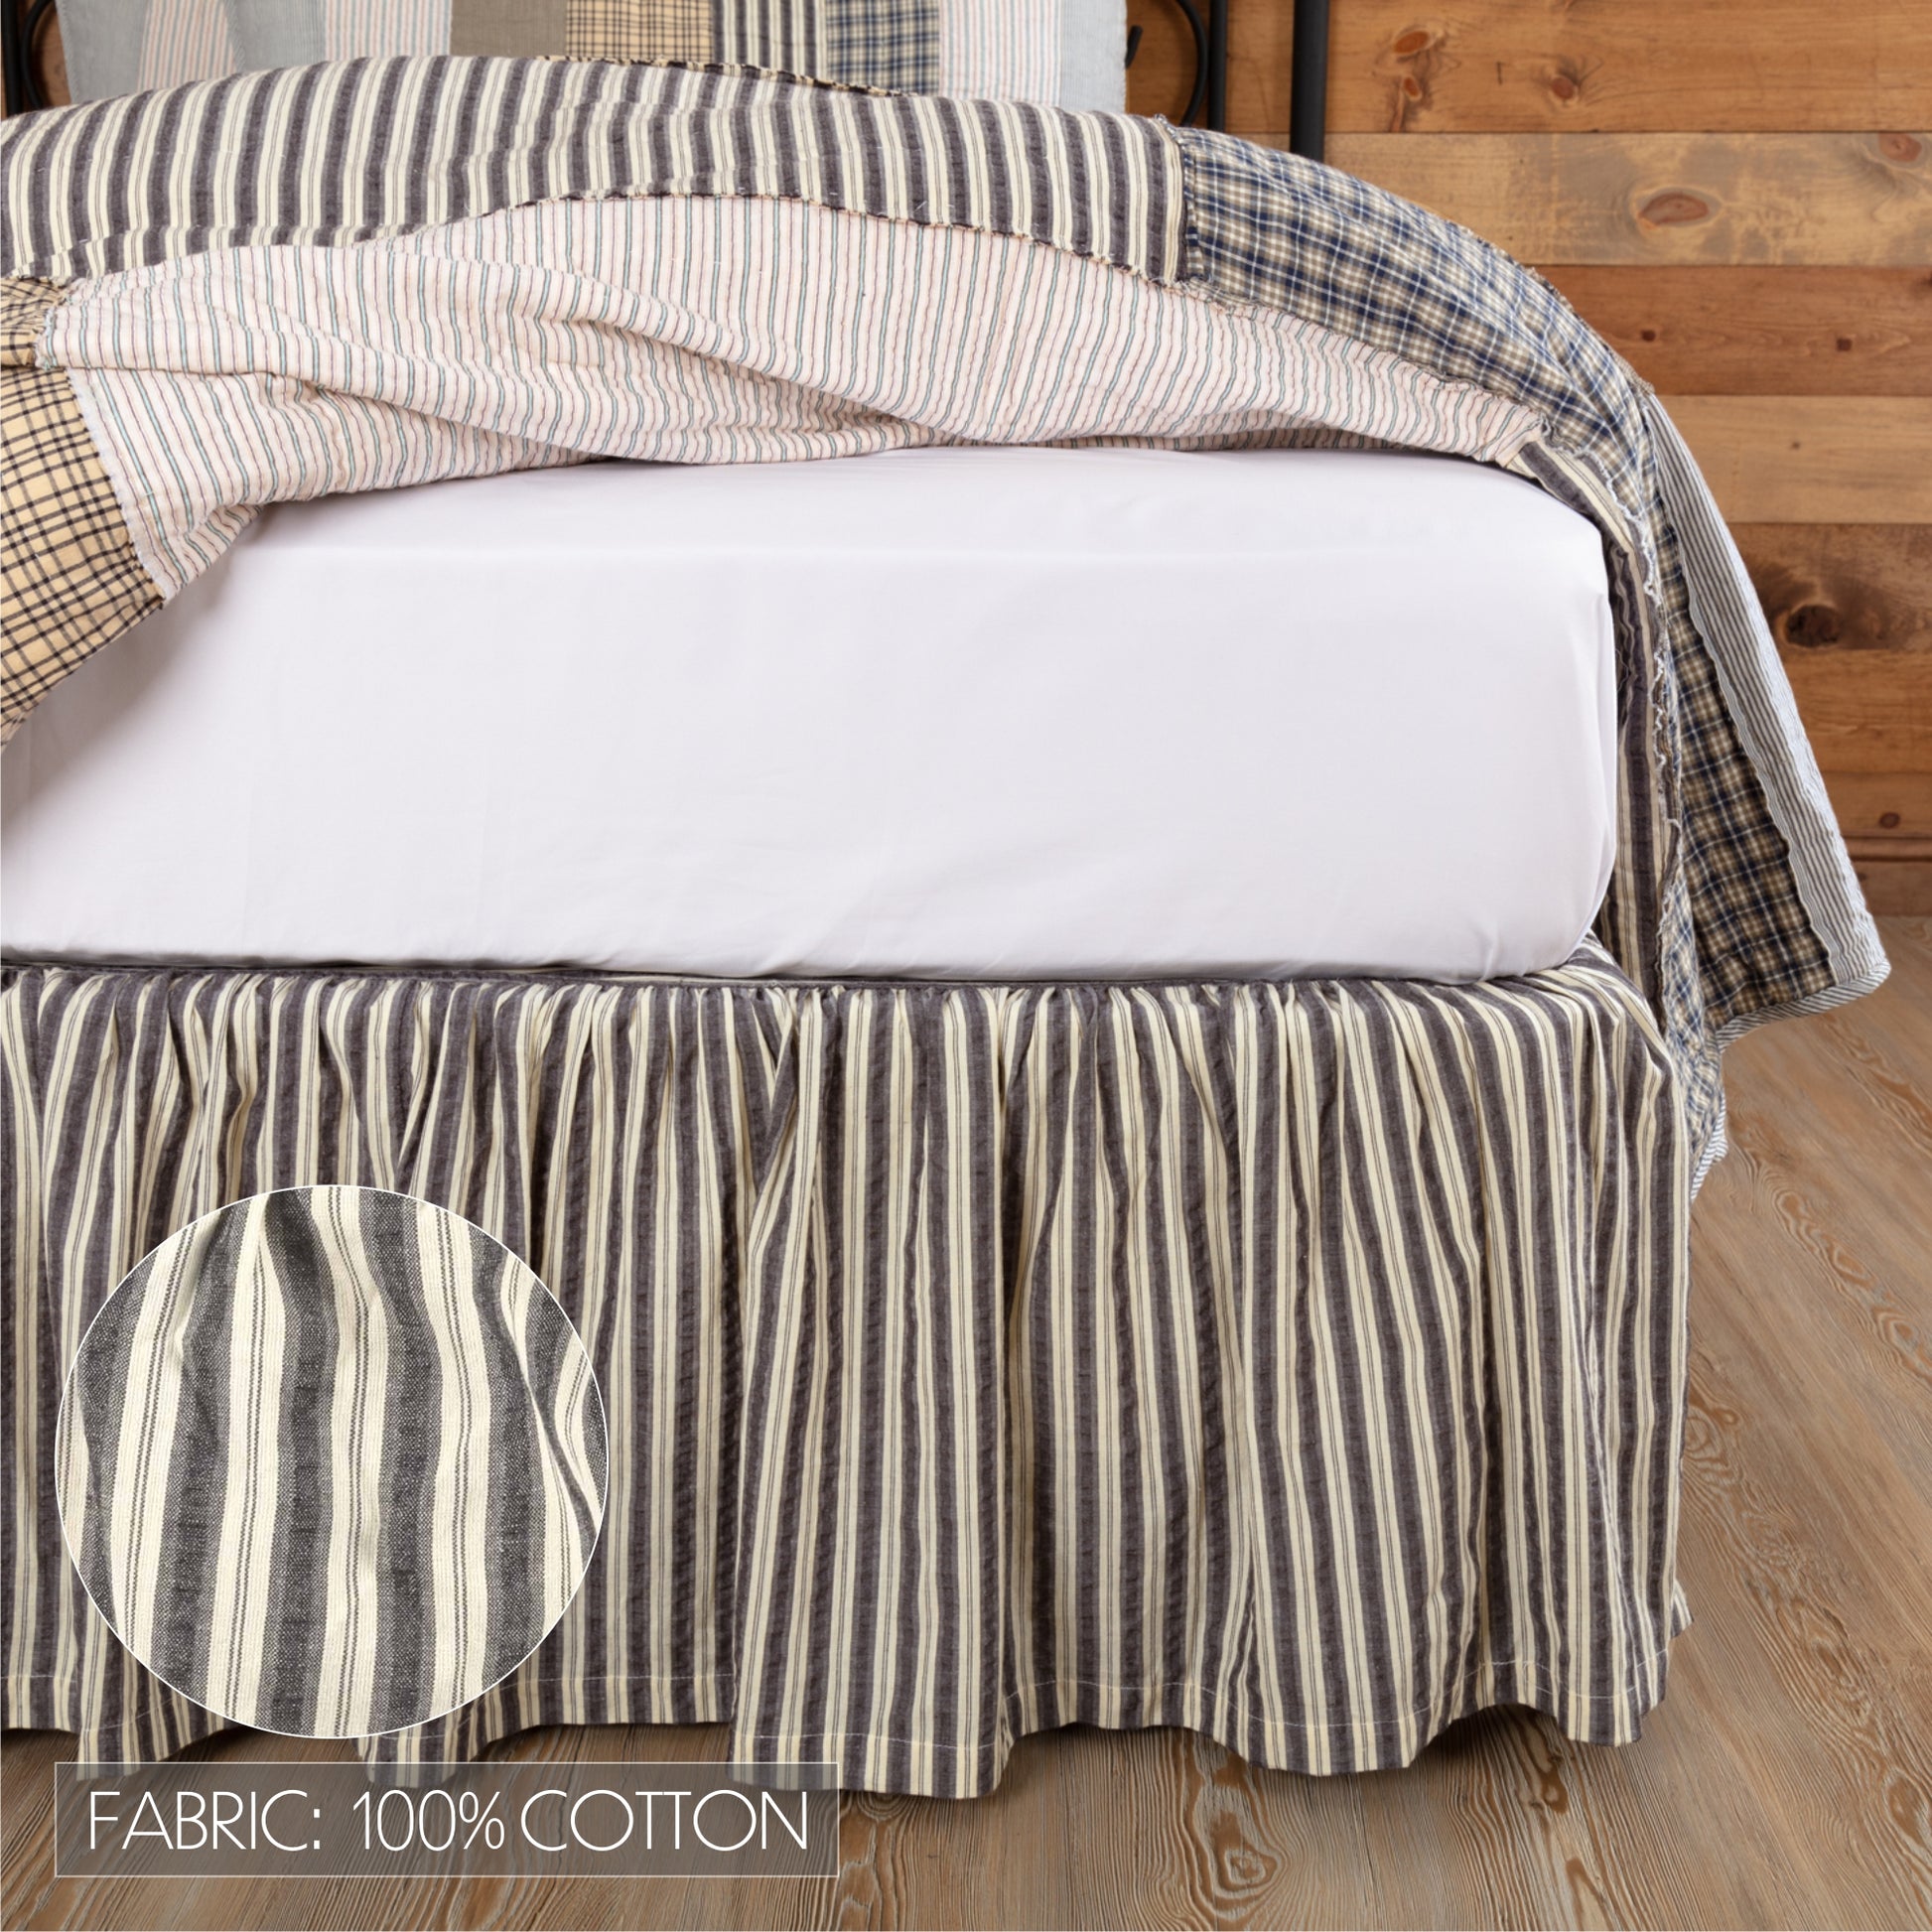 23363-Ashmont-Queen-Bed-Skirt-60x80x16-image-2